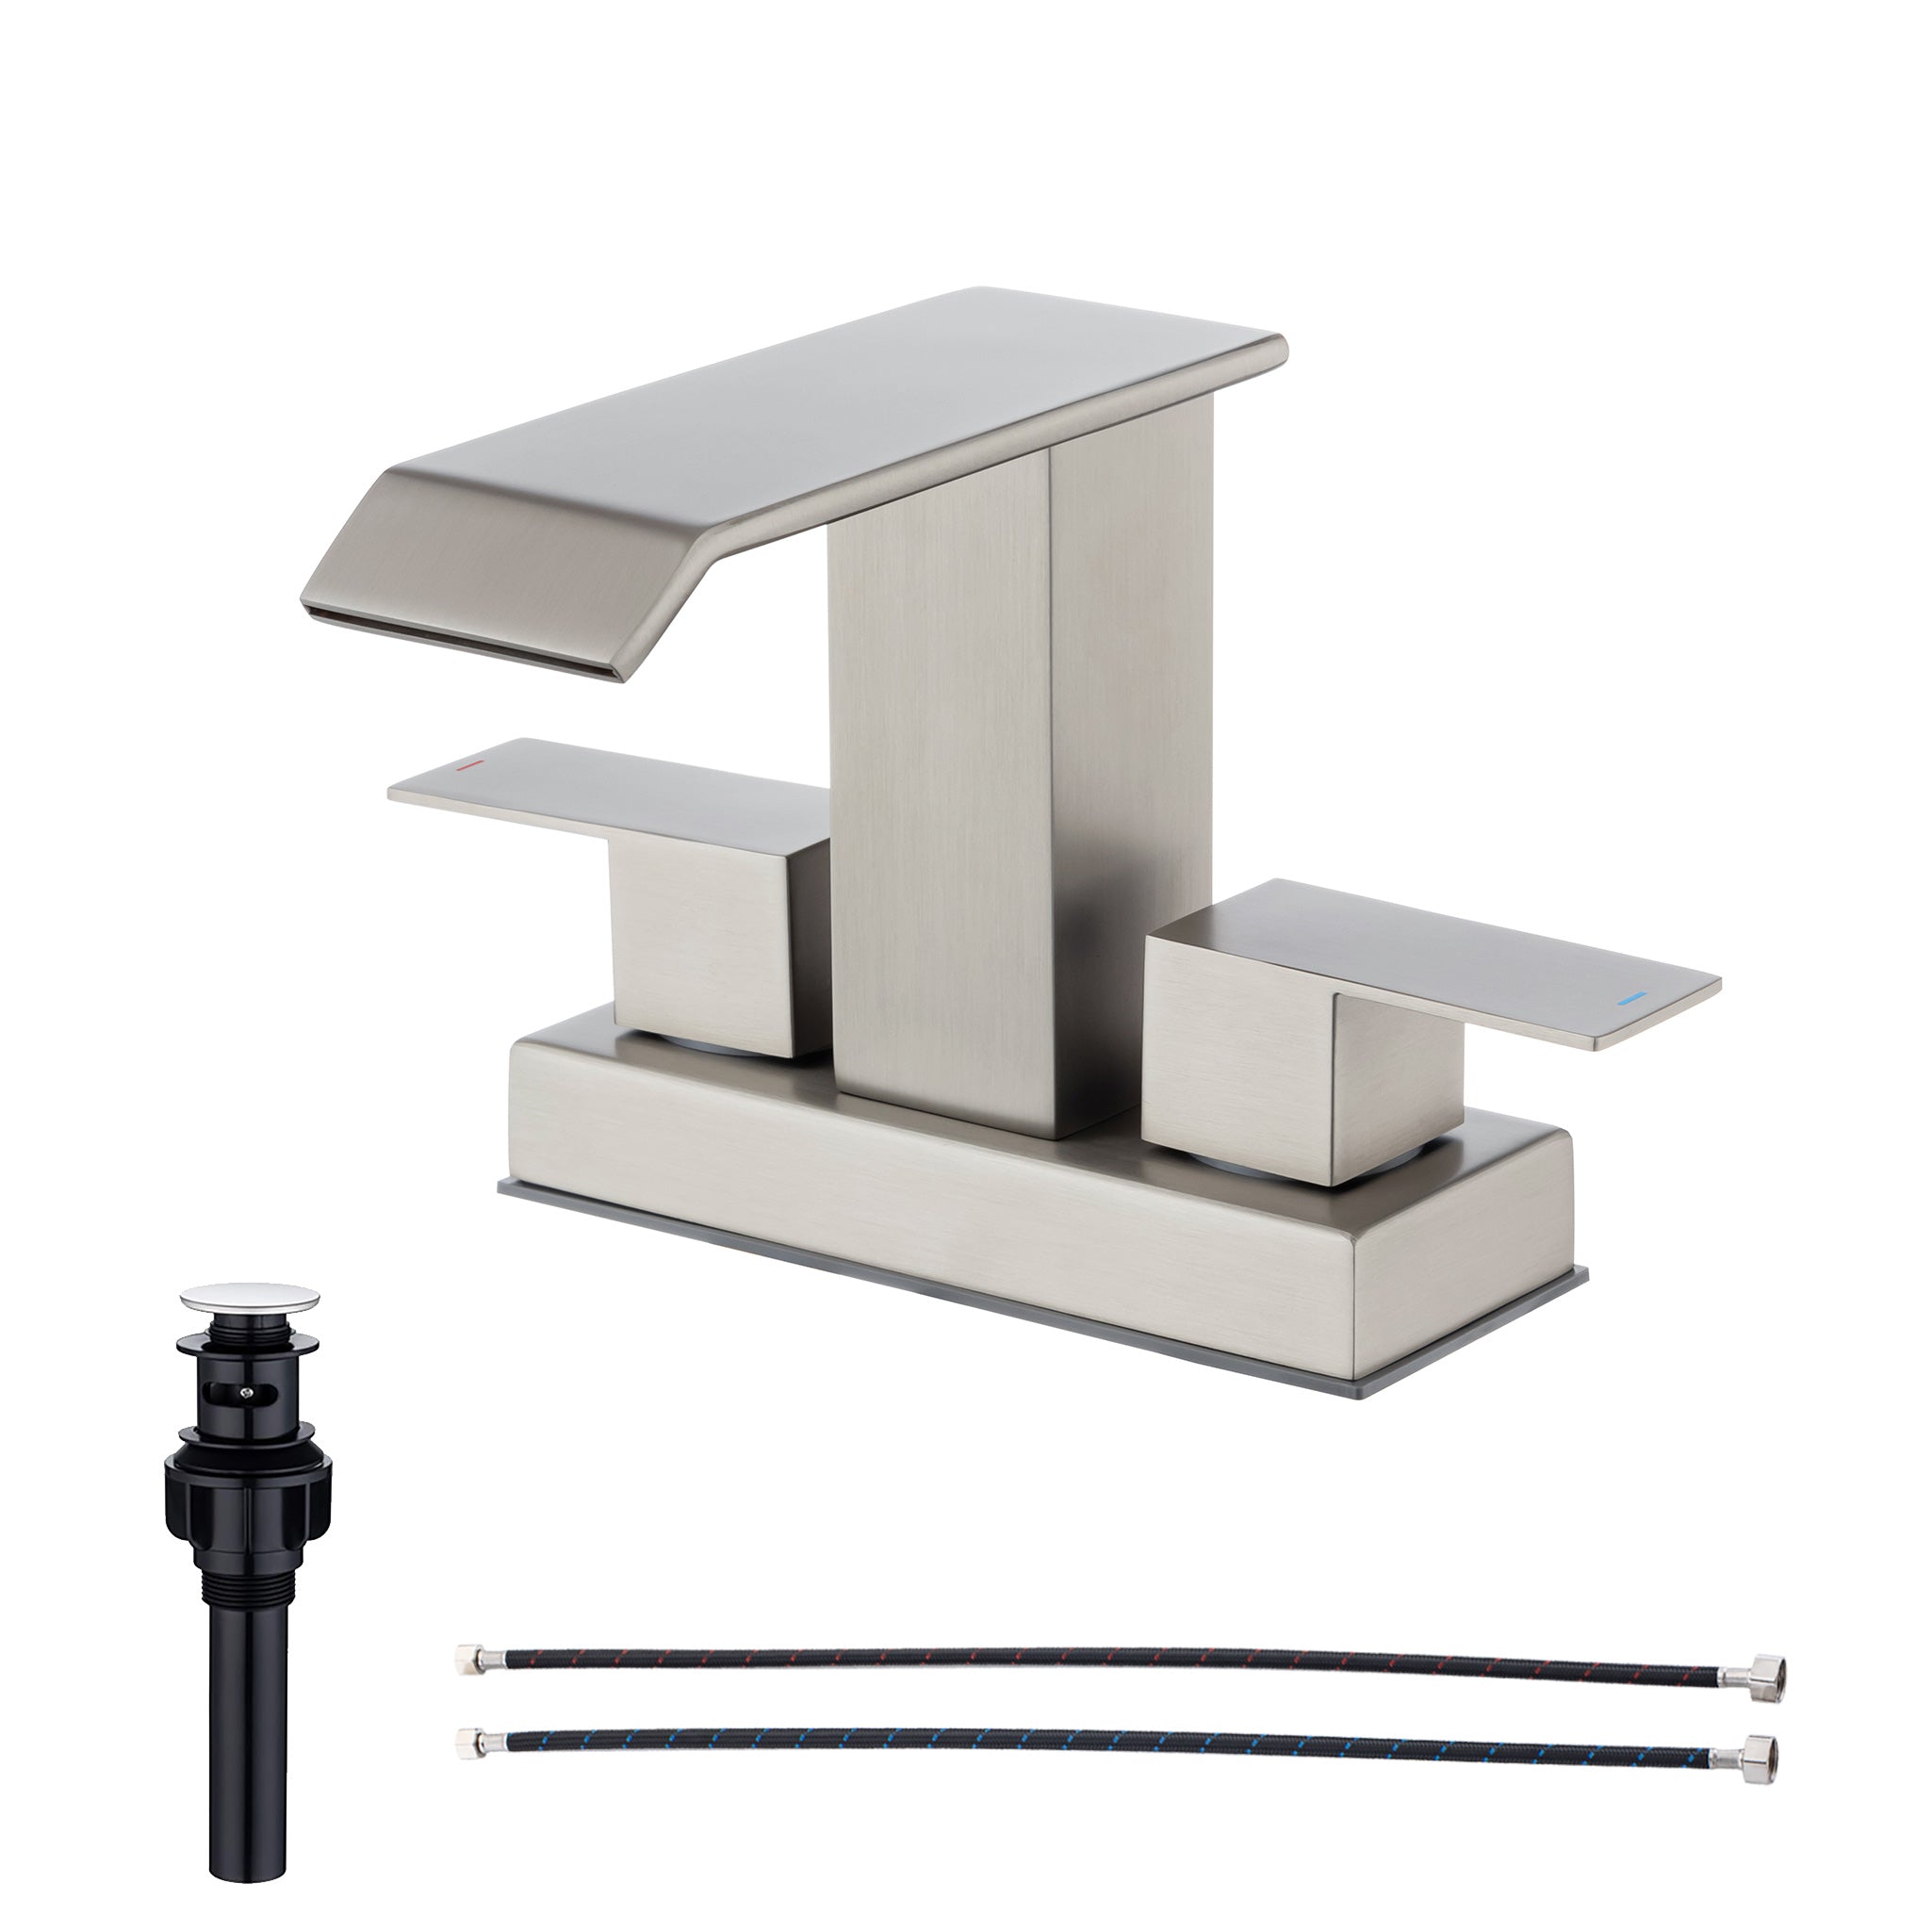 Centerset Faucet 2-handle Bathroom Faucet with Drain Assembly RX3017